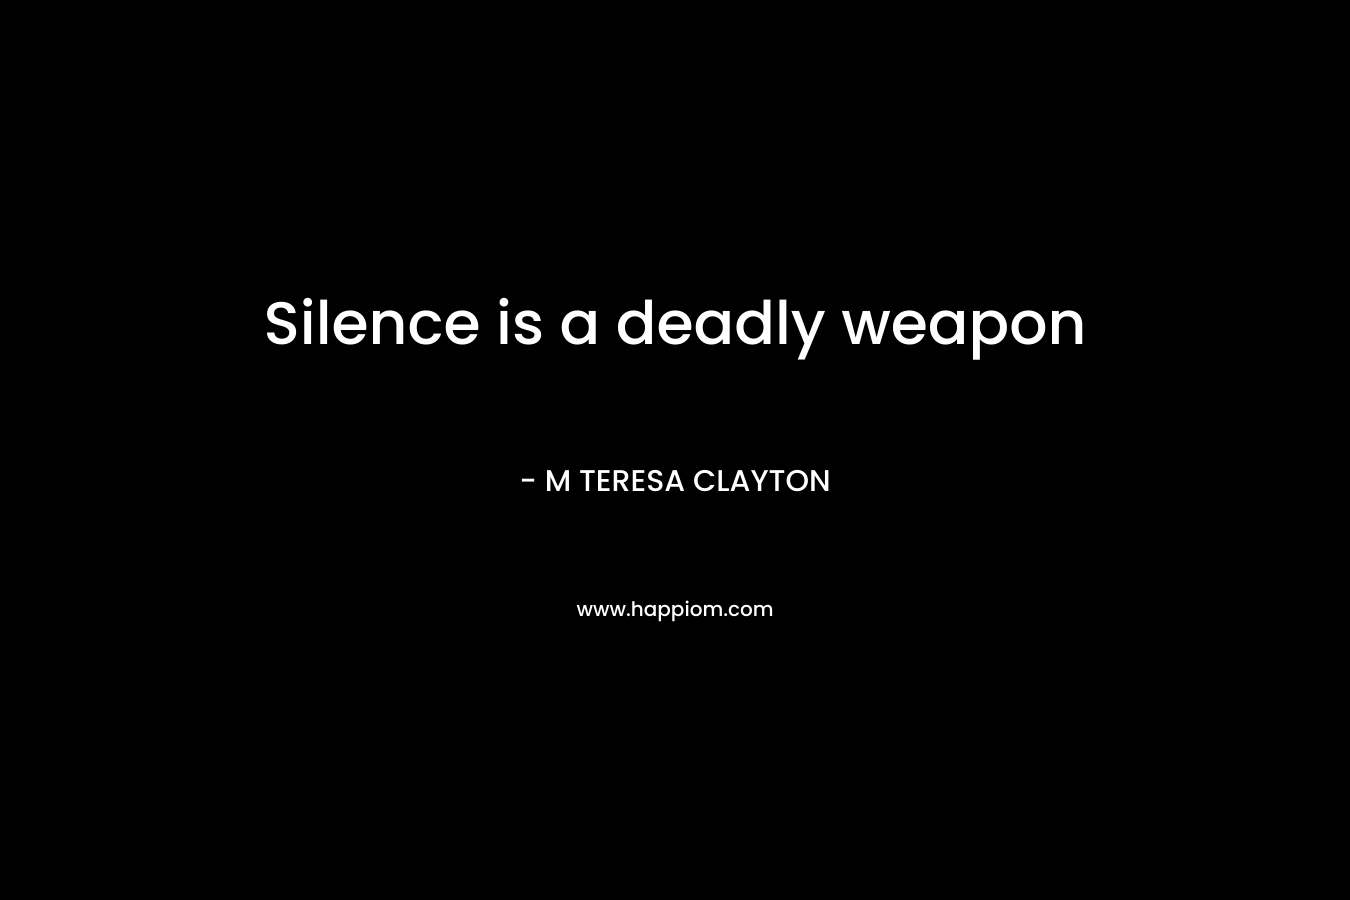 Silence is a deadly weapon